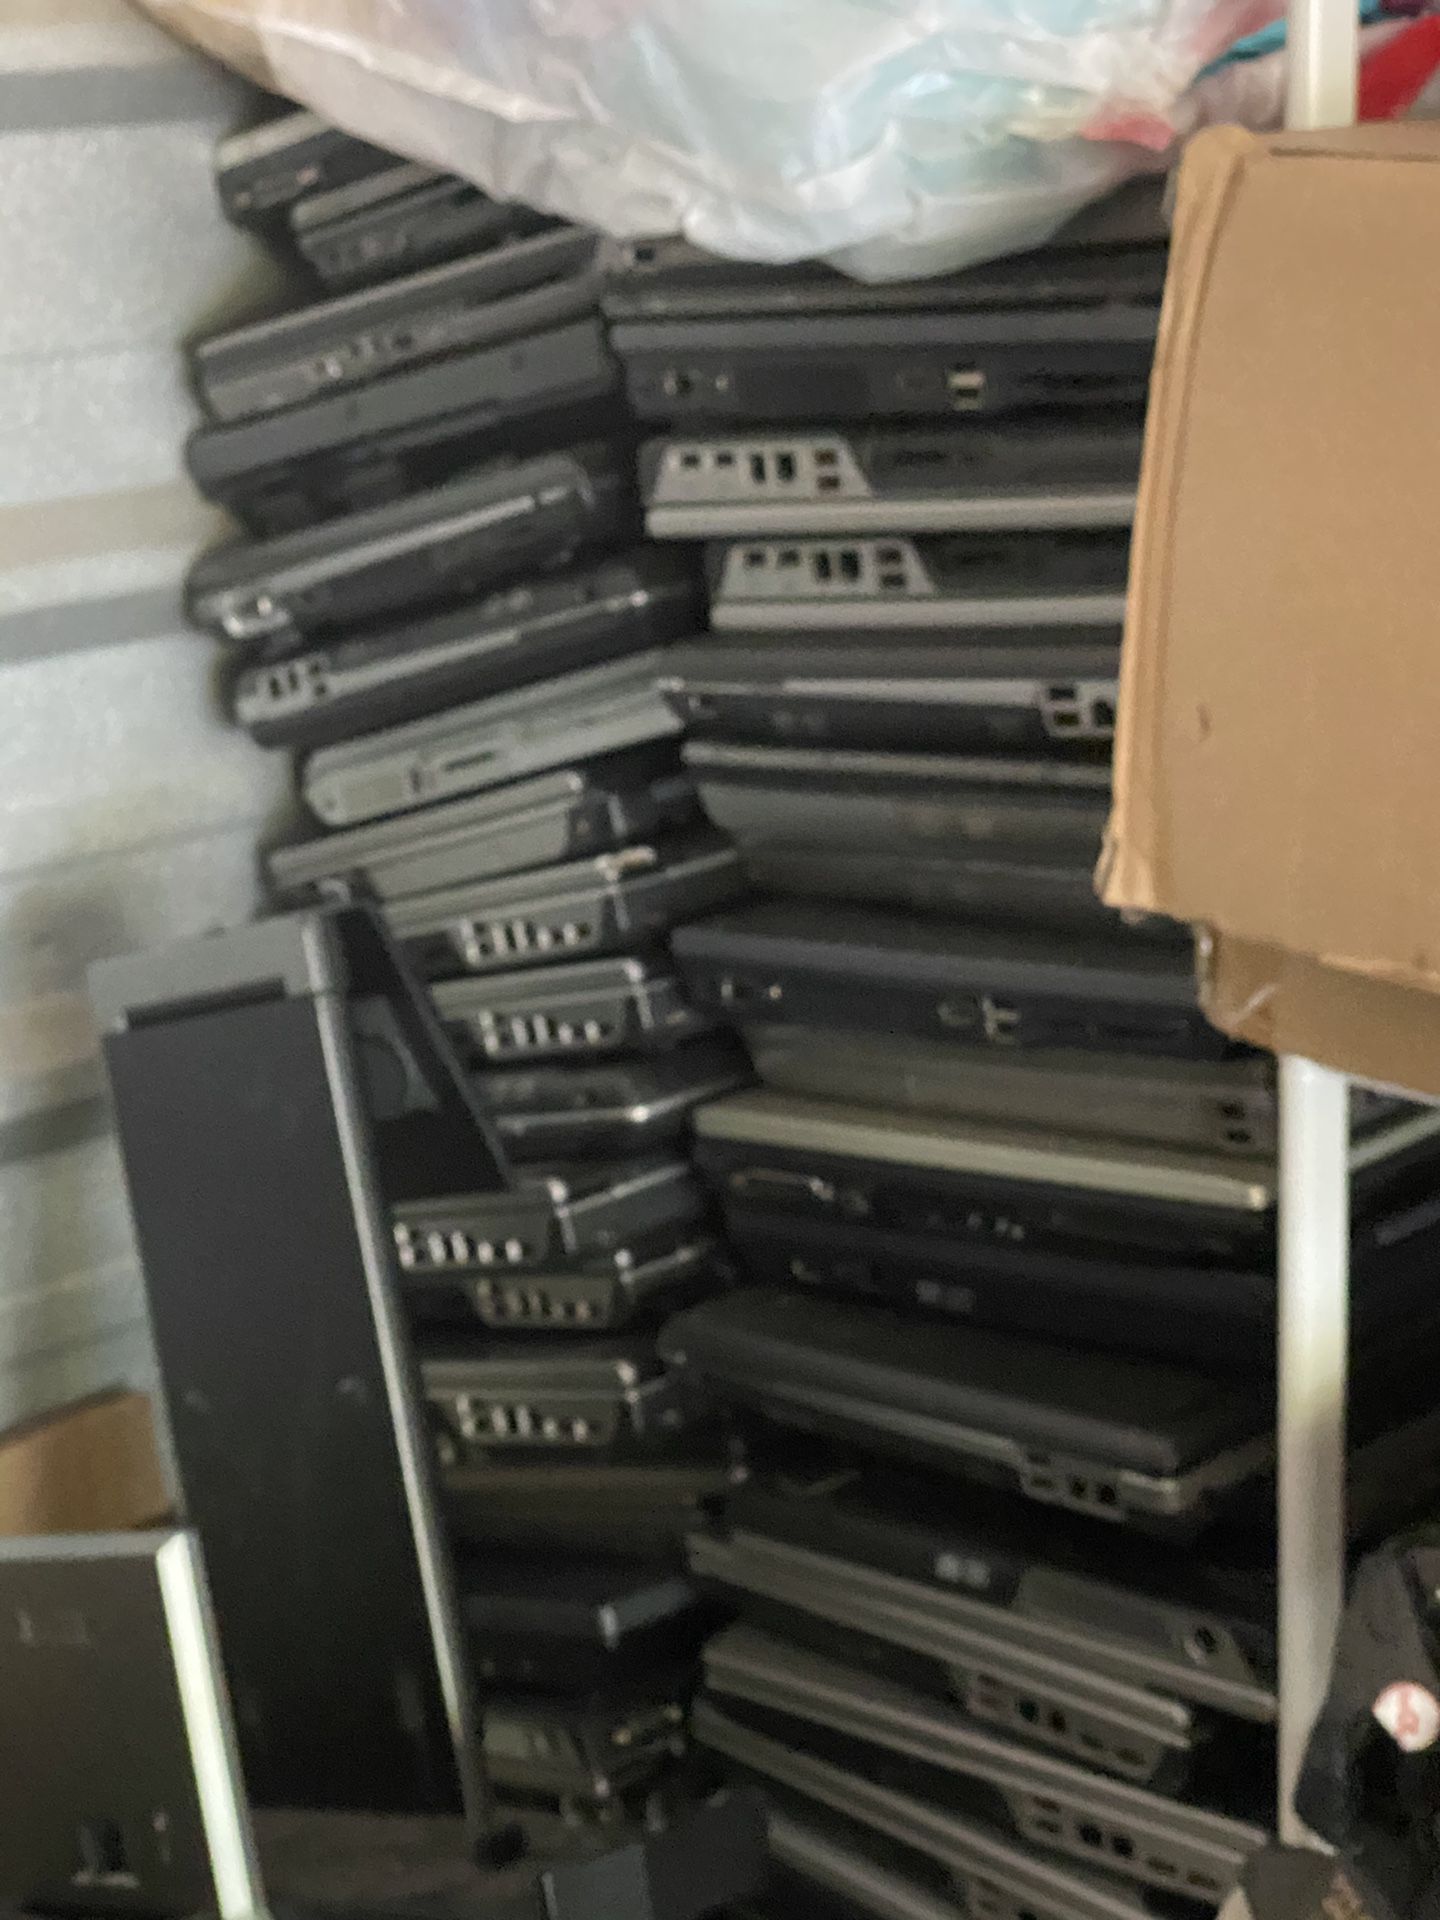 Lot of 75 Laptops, $30 each. You have to buy all. (Dell, Hp, Gateway and more. Mostly Core 2 Due, the laptops were in working condition before I buy